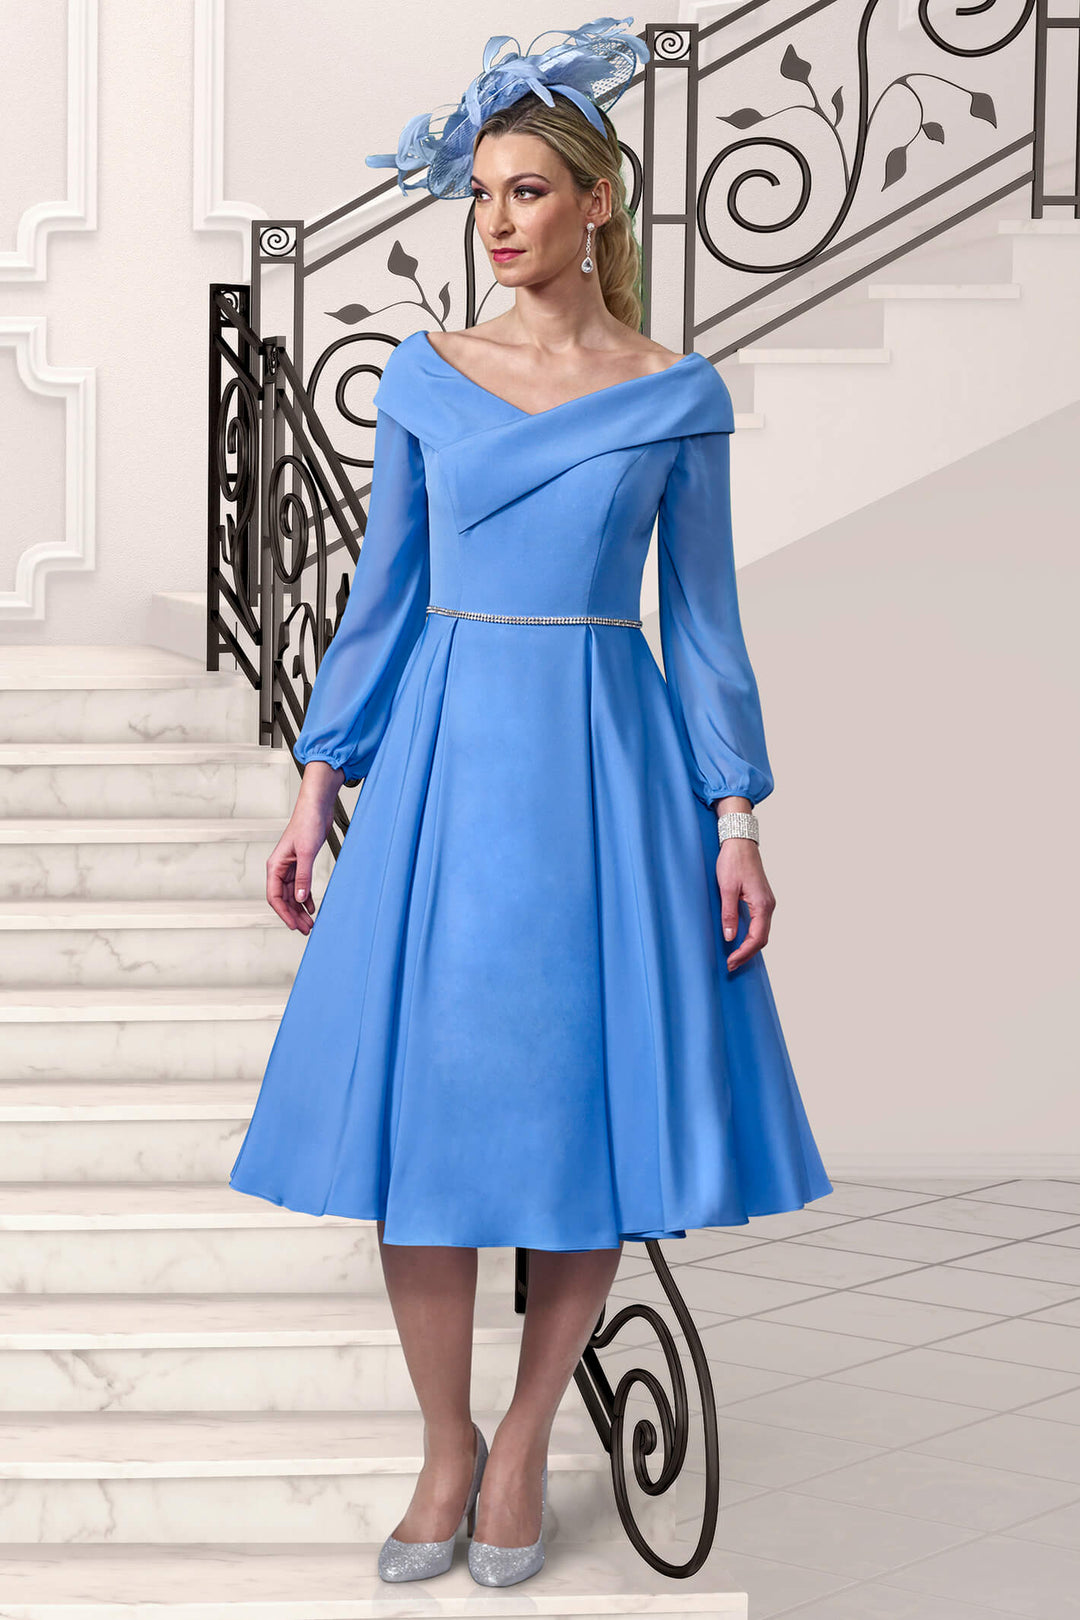 Veromia VO9693 Ocean Blue On-The-Shoulder A-Line Occasion Dress